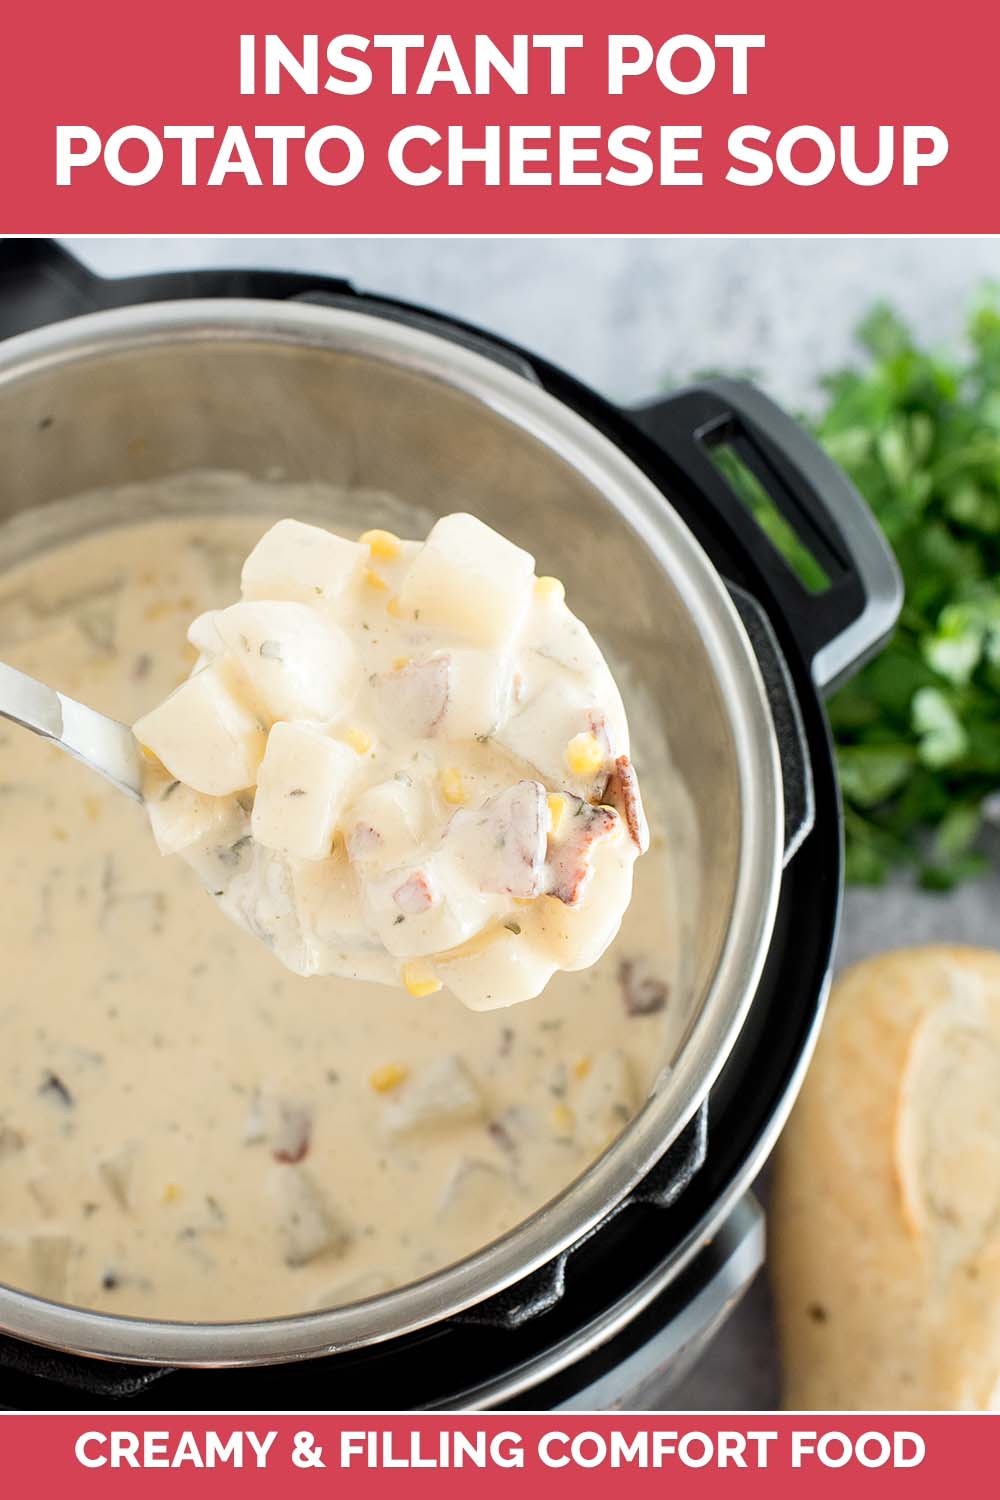 Instant Pot Potato Cheese Soup is loaded with chunky potatoes, bacon, corn, and two kinds of cheese for a filling soup that's perfect to make-ahead and via @PressureCook2da